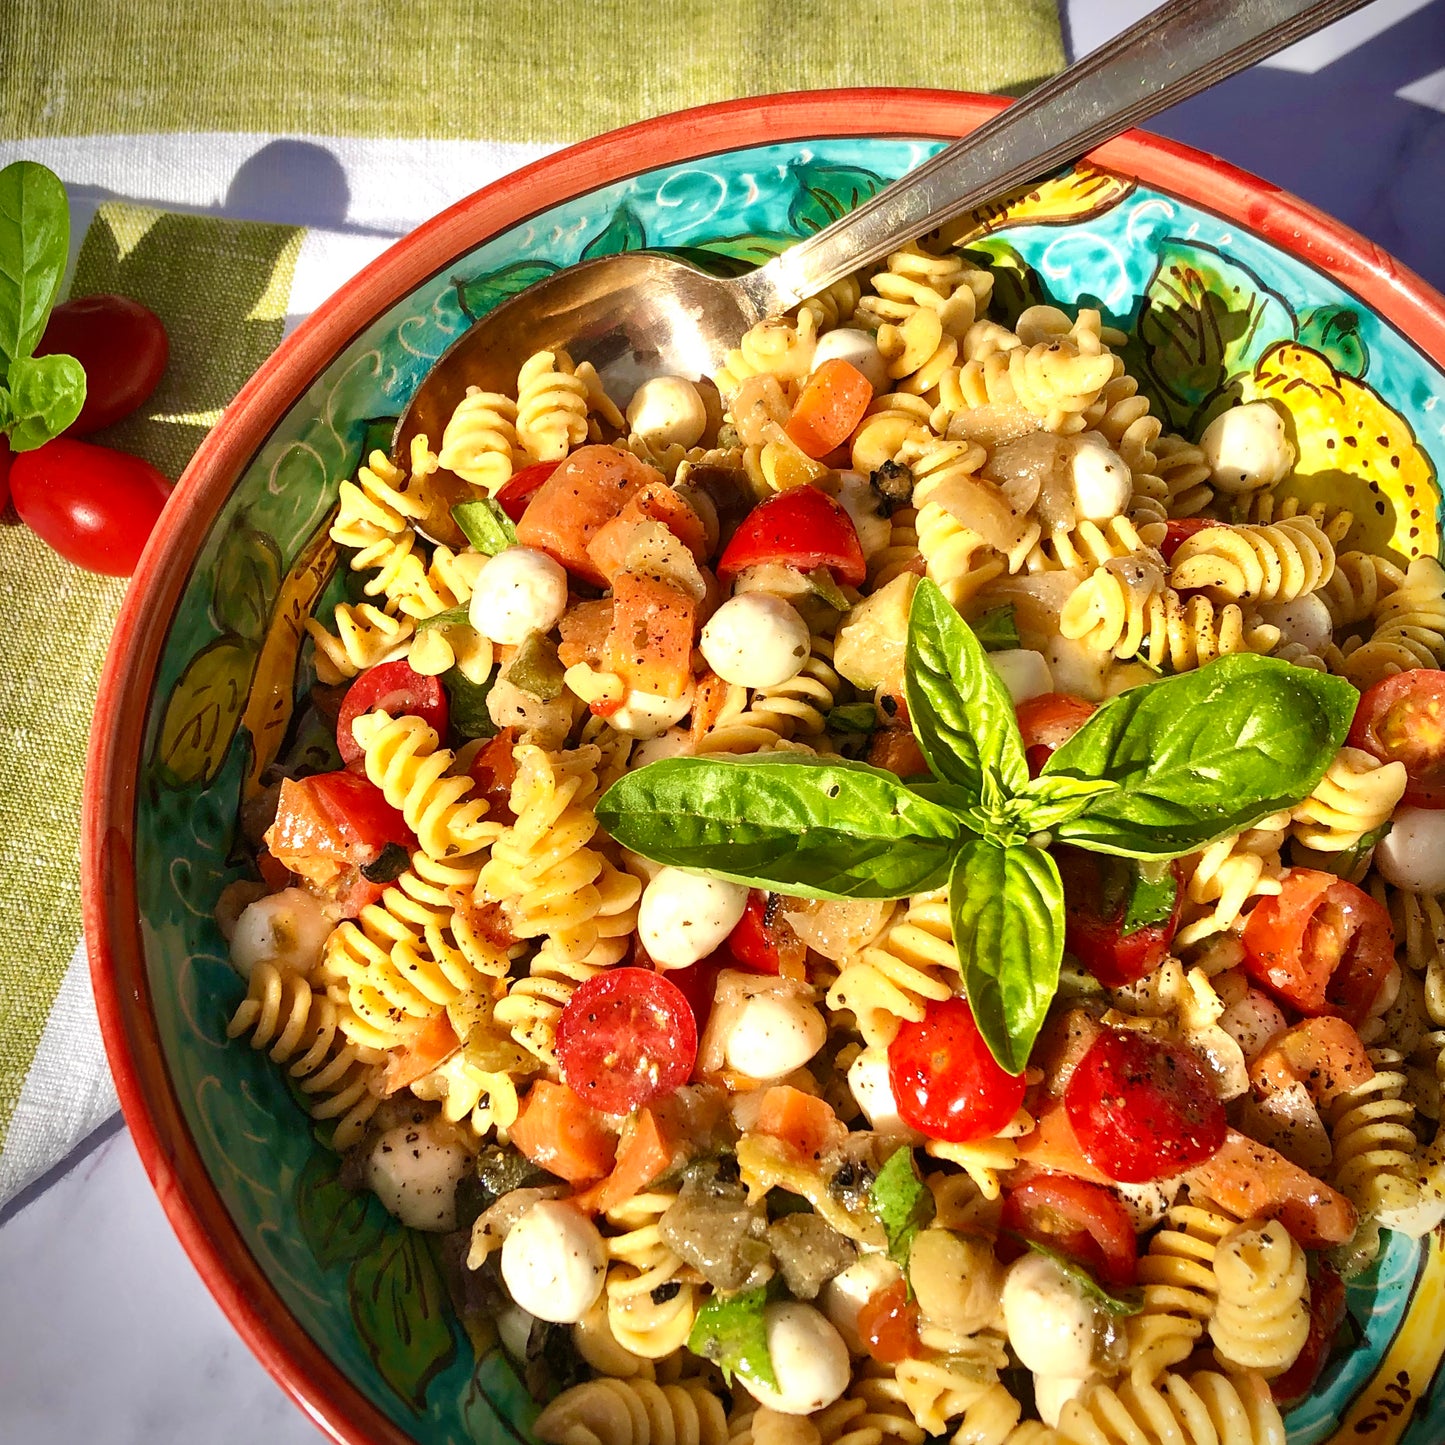 Gluten-Free Chickpea Pasta Salad with Grilled Vegetables